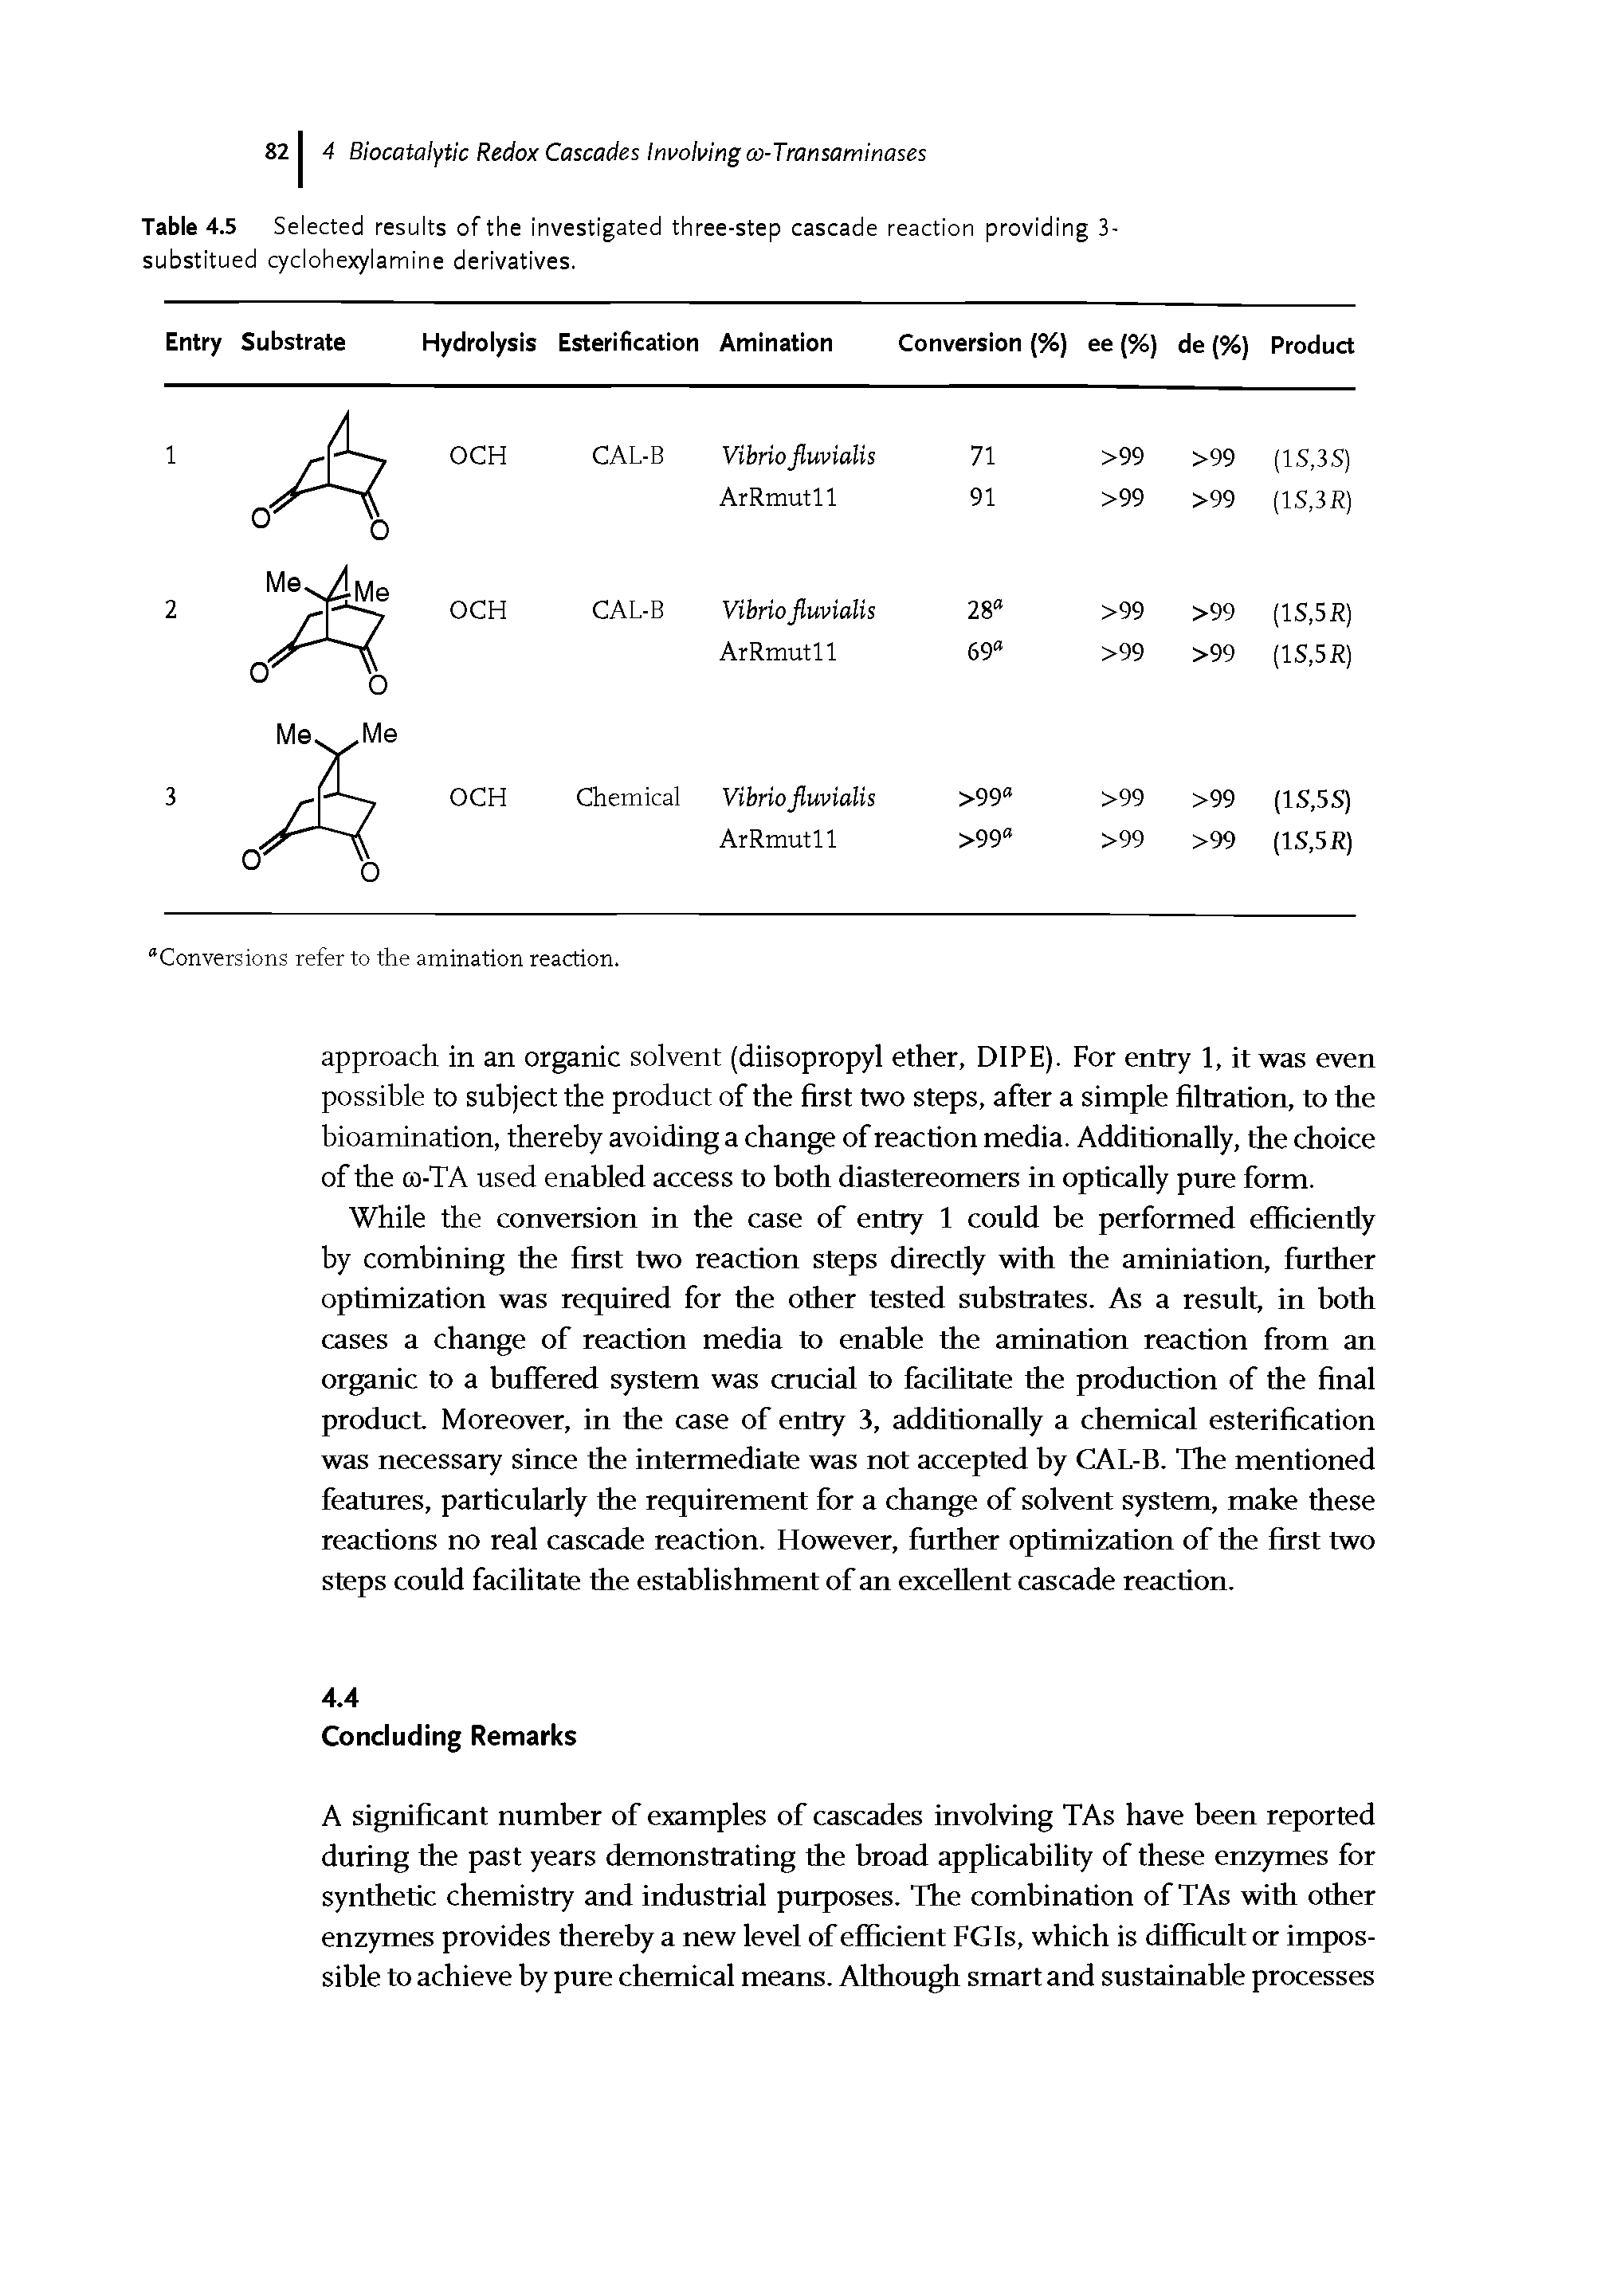 Table 4.5 Selected results of the investigated three-step cascade reaction providing 3-substitued cyclohexylamine derivatives.